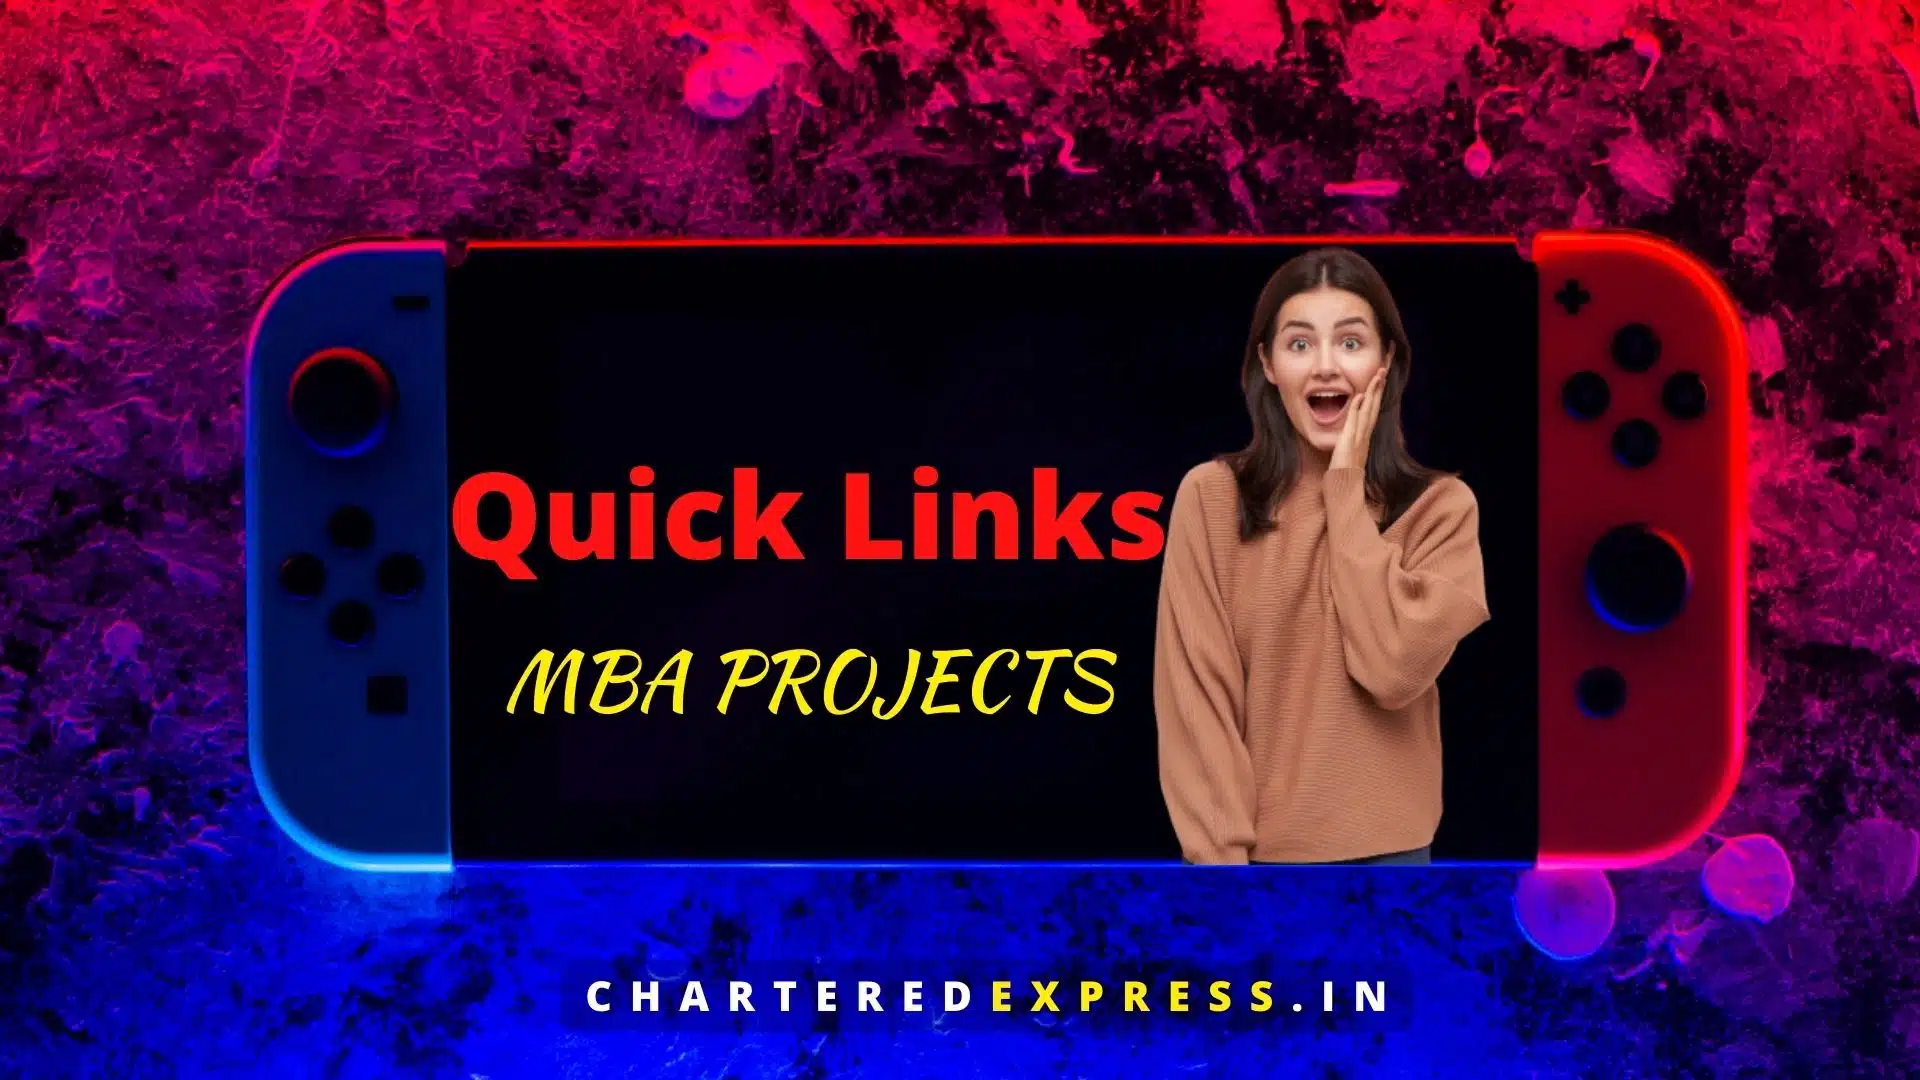 Chartered express mba project report